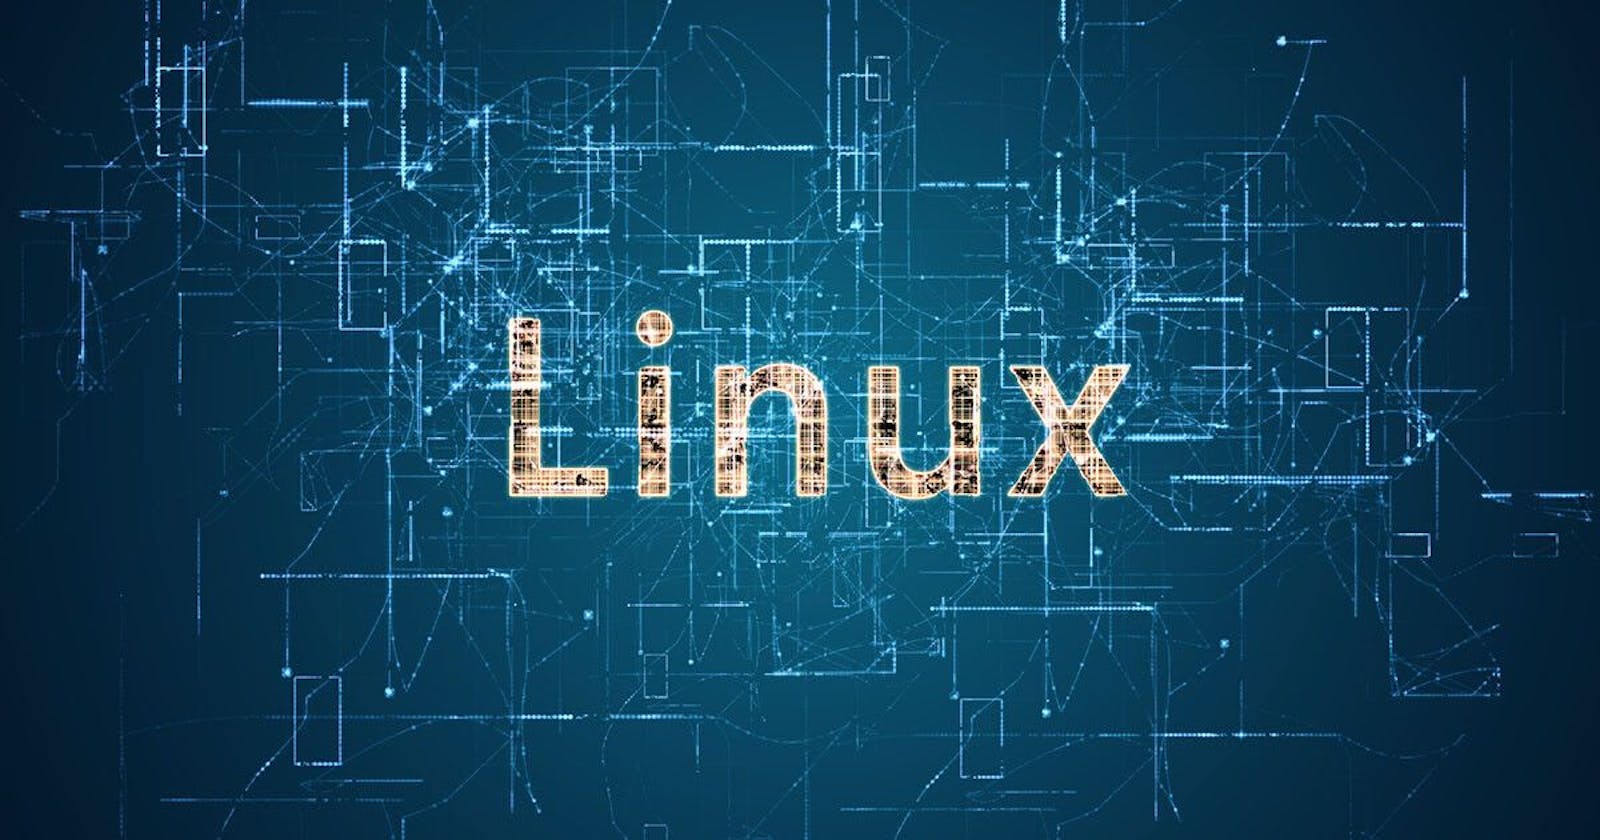 Advanced Linux Shell Scripting for DevOps Engineers with User management